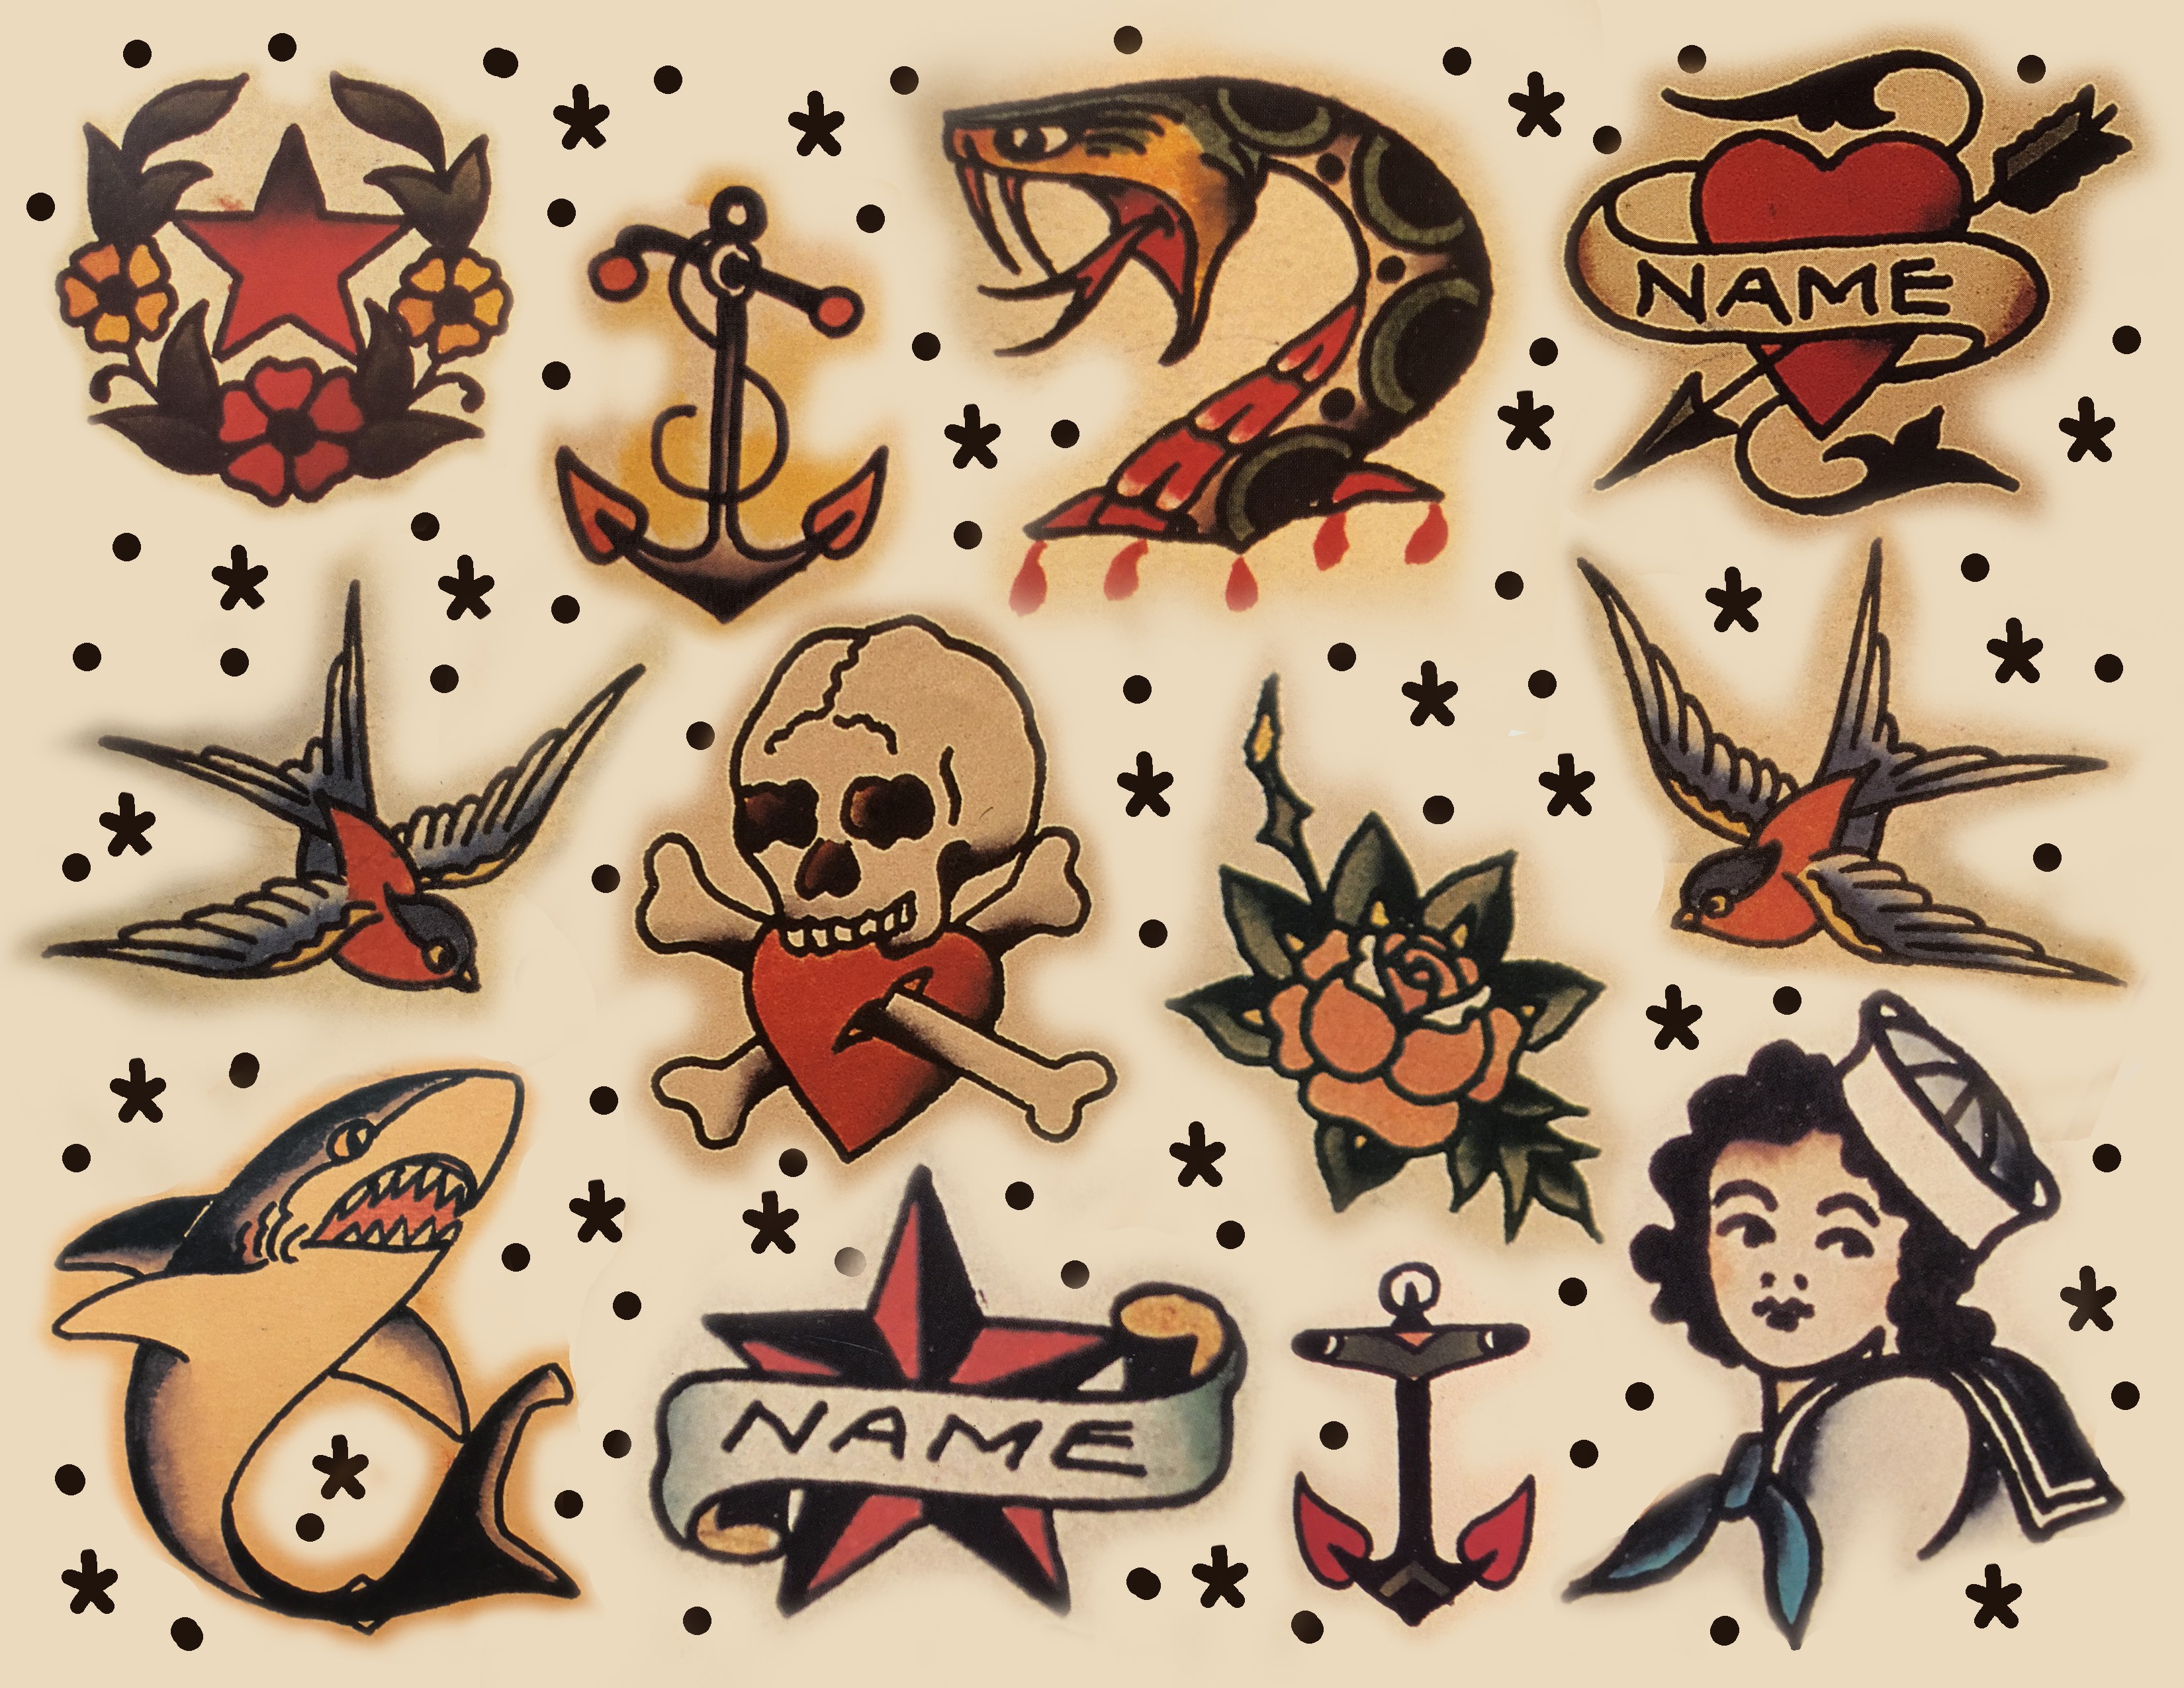 25 Sailor Jerry Tattoos to Rock Your World